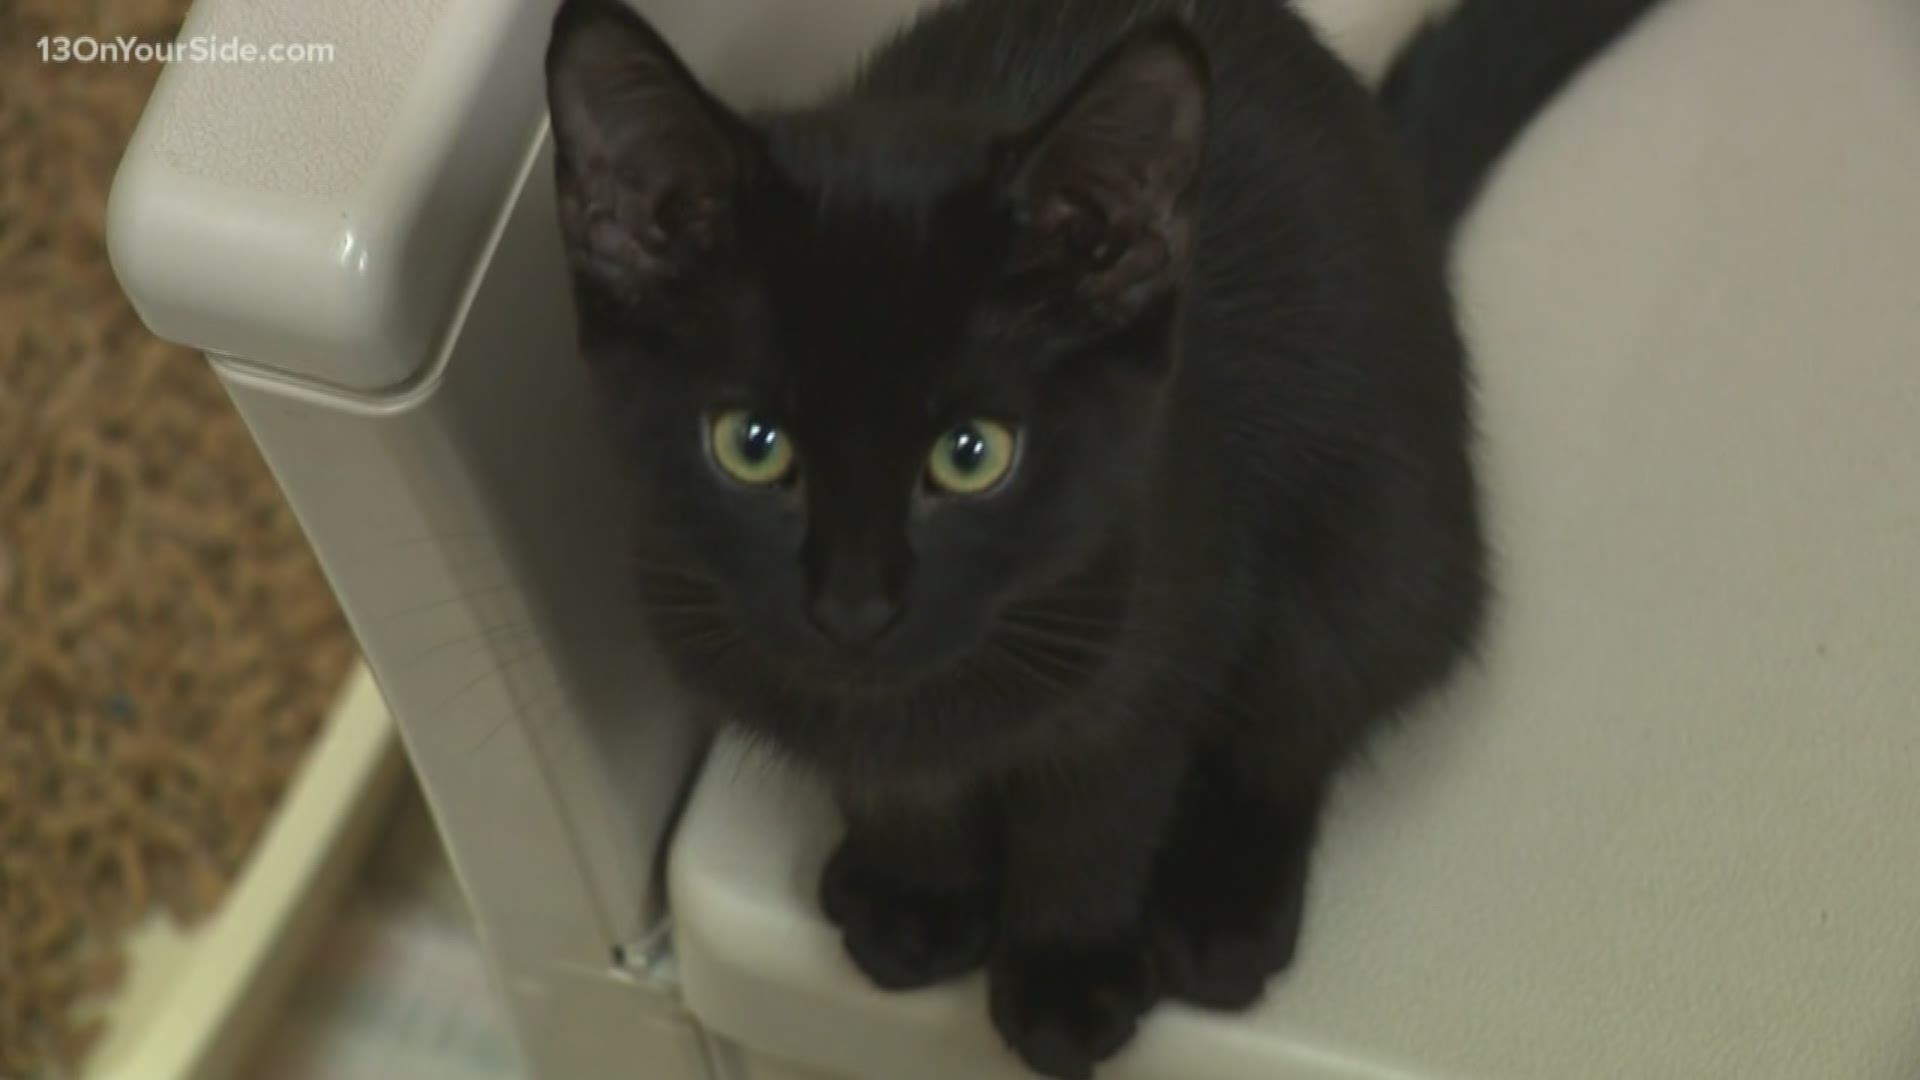 The shelter has recently seen a massive influx of cats and kittens, and they're asking to help "meowt."